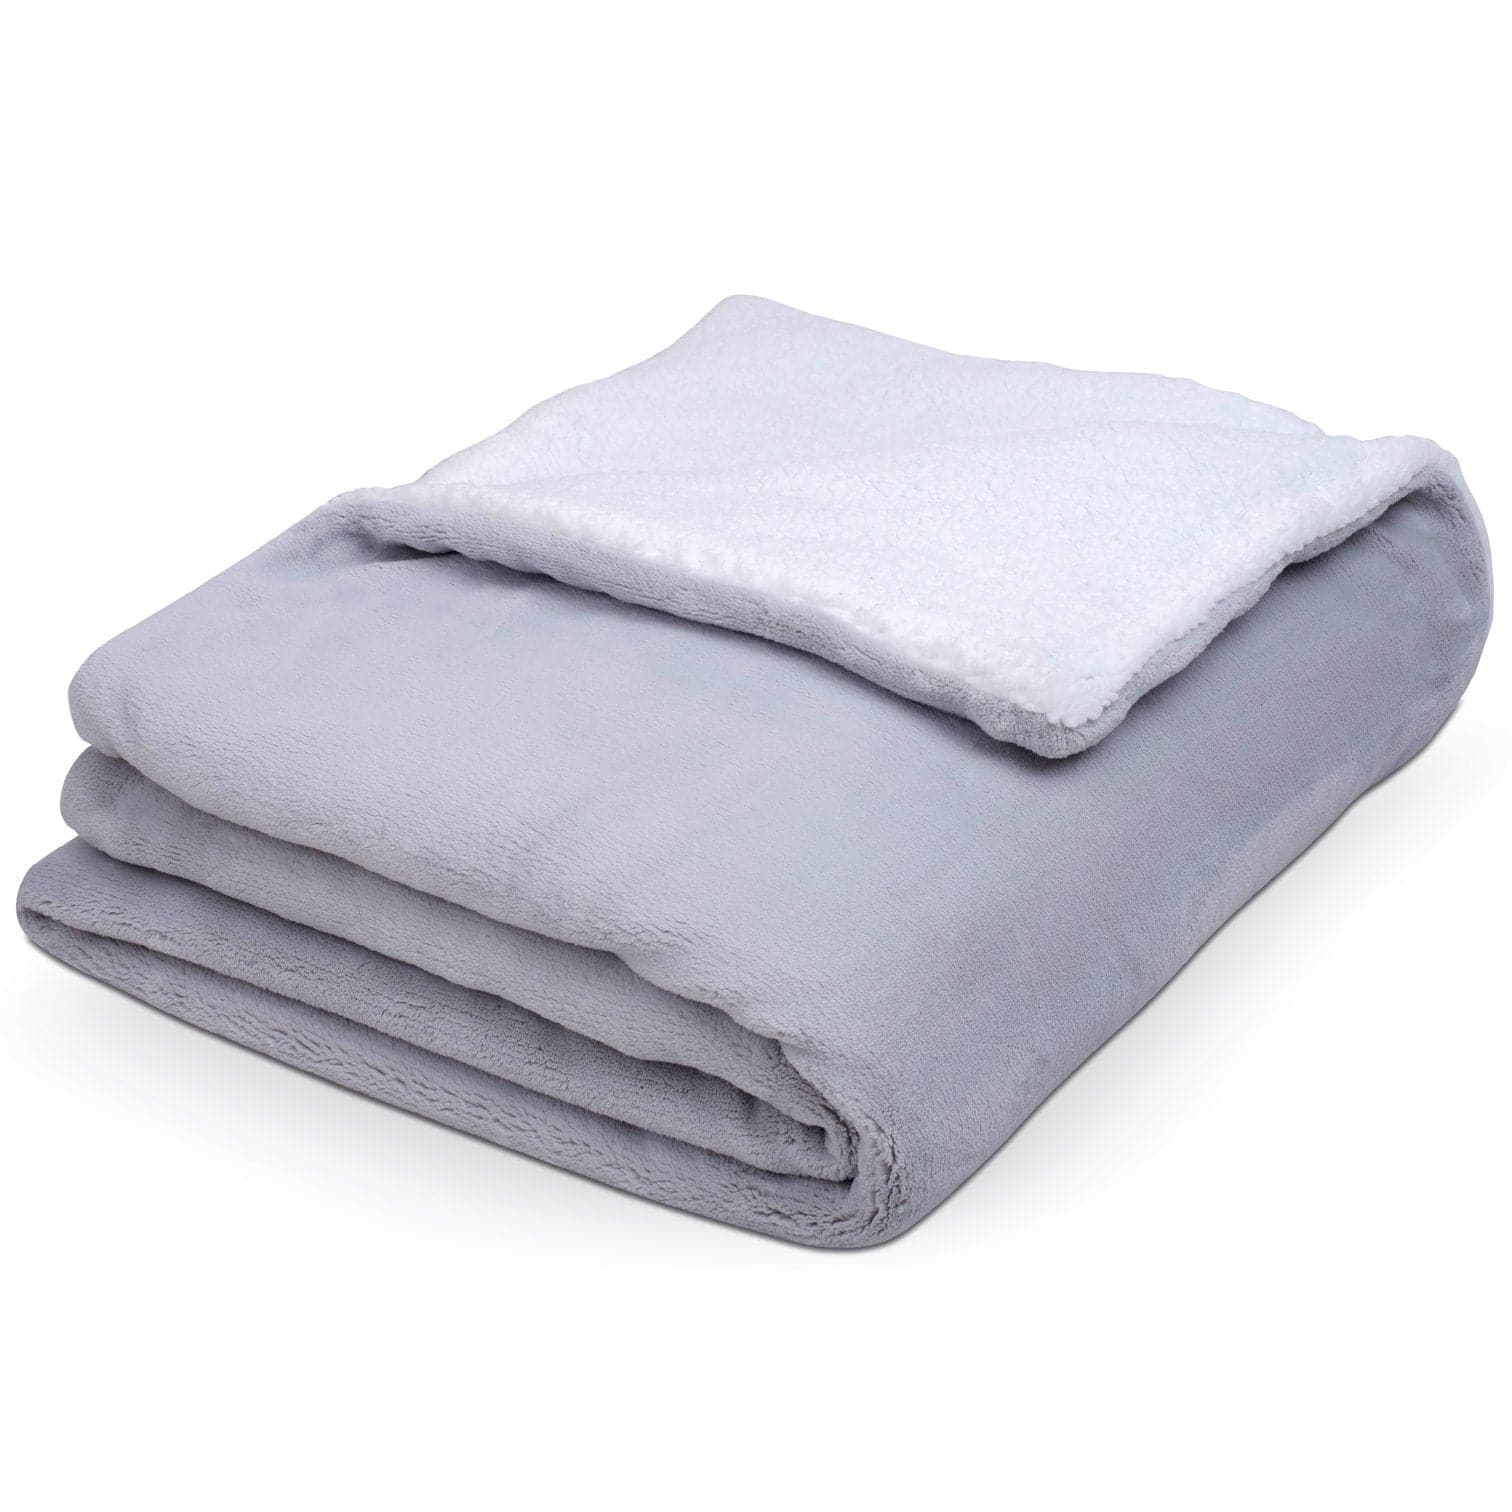 Hush Throw Weighted Blanket 